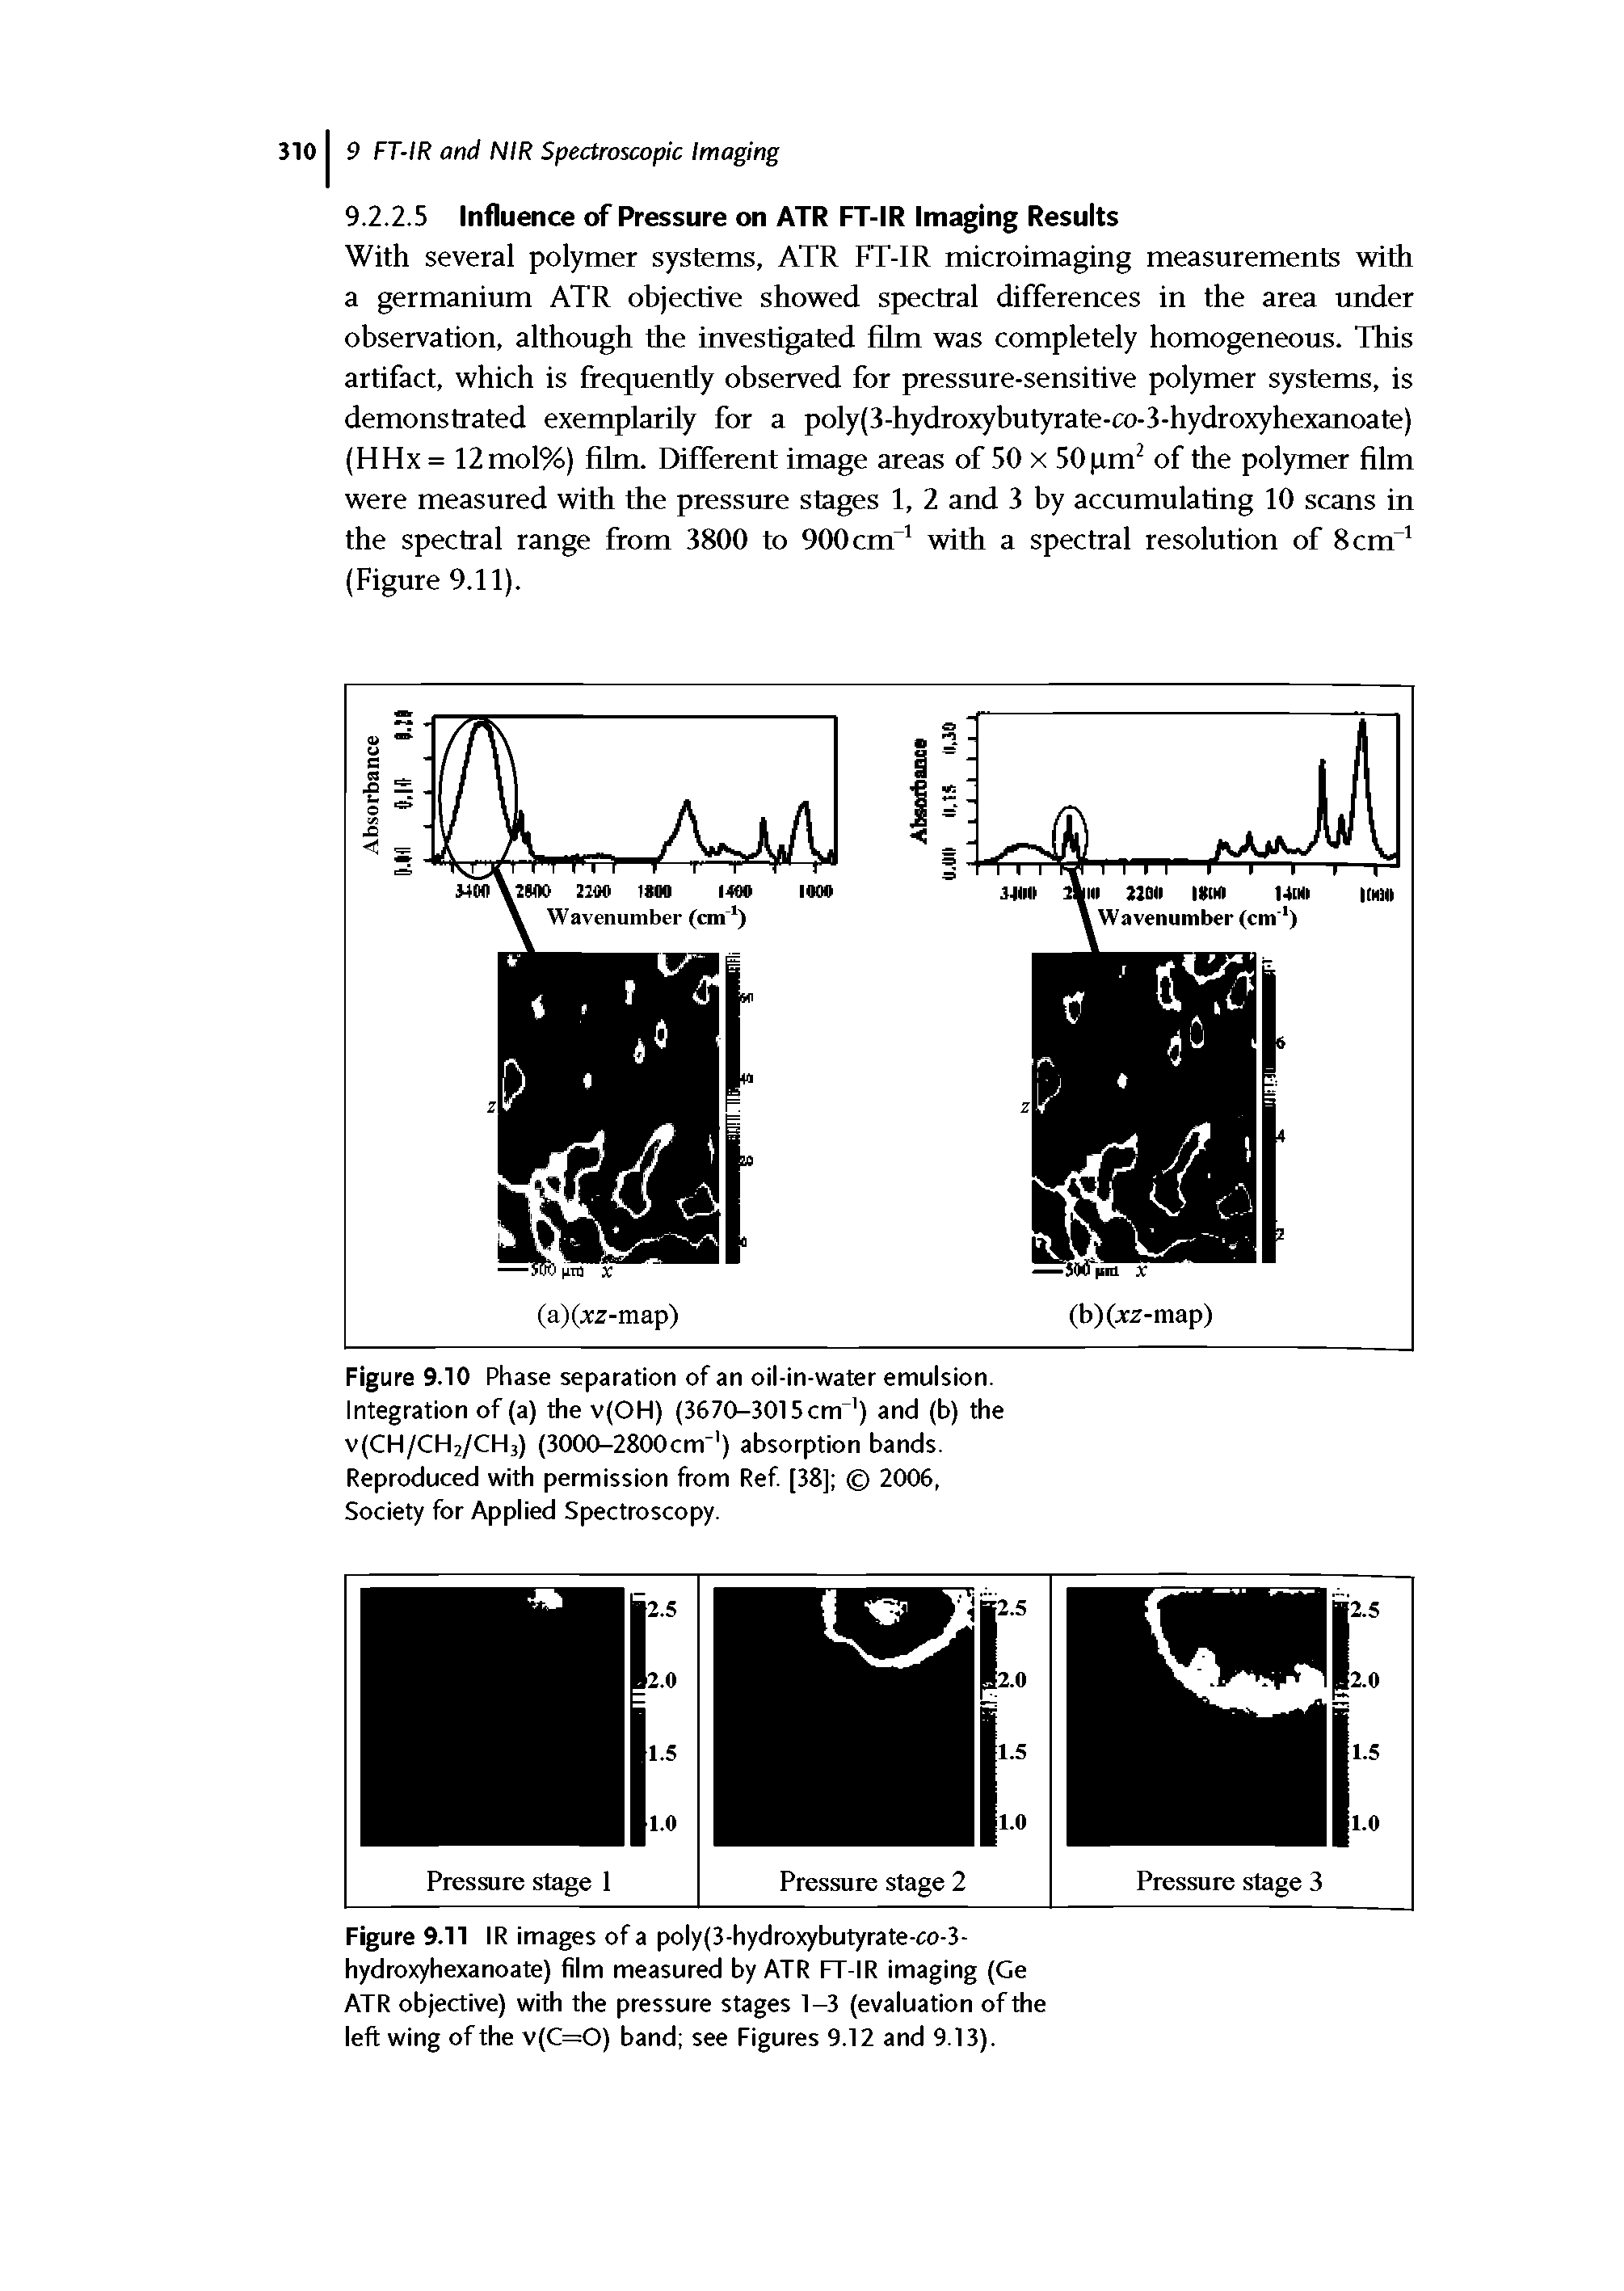 Figure 9.11 IR images of a poly(3-hydroxybutyrate-co-3-hydroxyhexanoate) film measured by ATR FT-IR imaging (Ge ATR objective) with the pressure stages 1-3 (evaluation of the left wing of the v(C=0) band see Figures 9.12 and 9.13).